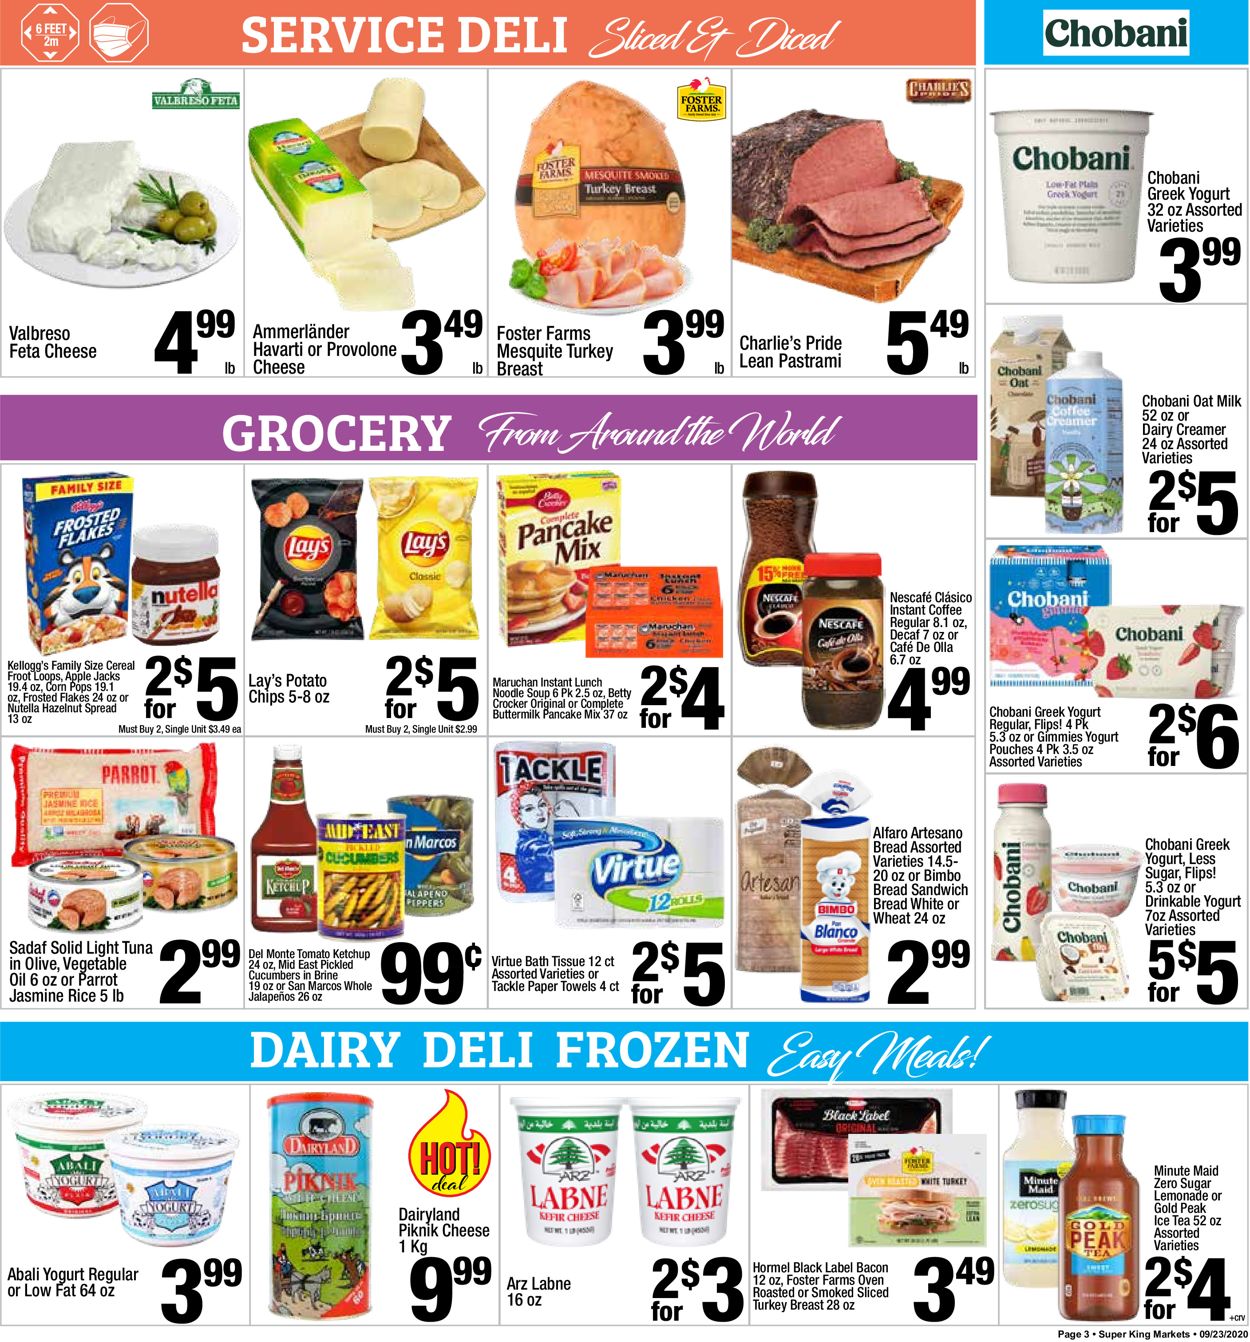 Catalogue Super King Market from 09/23/2020